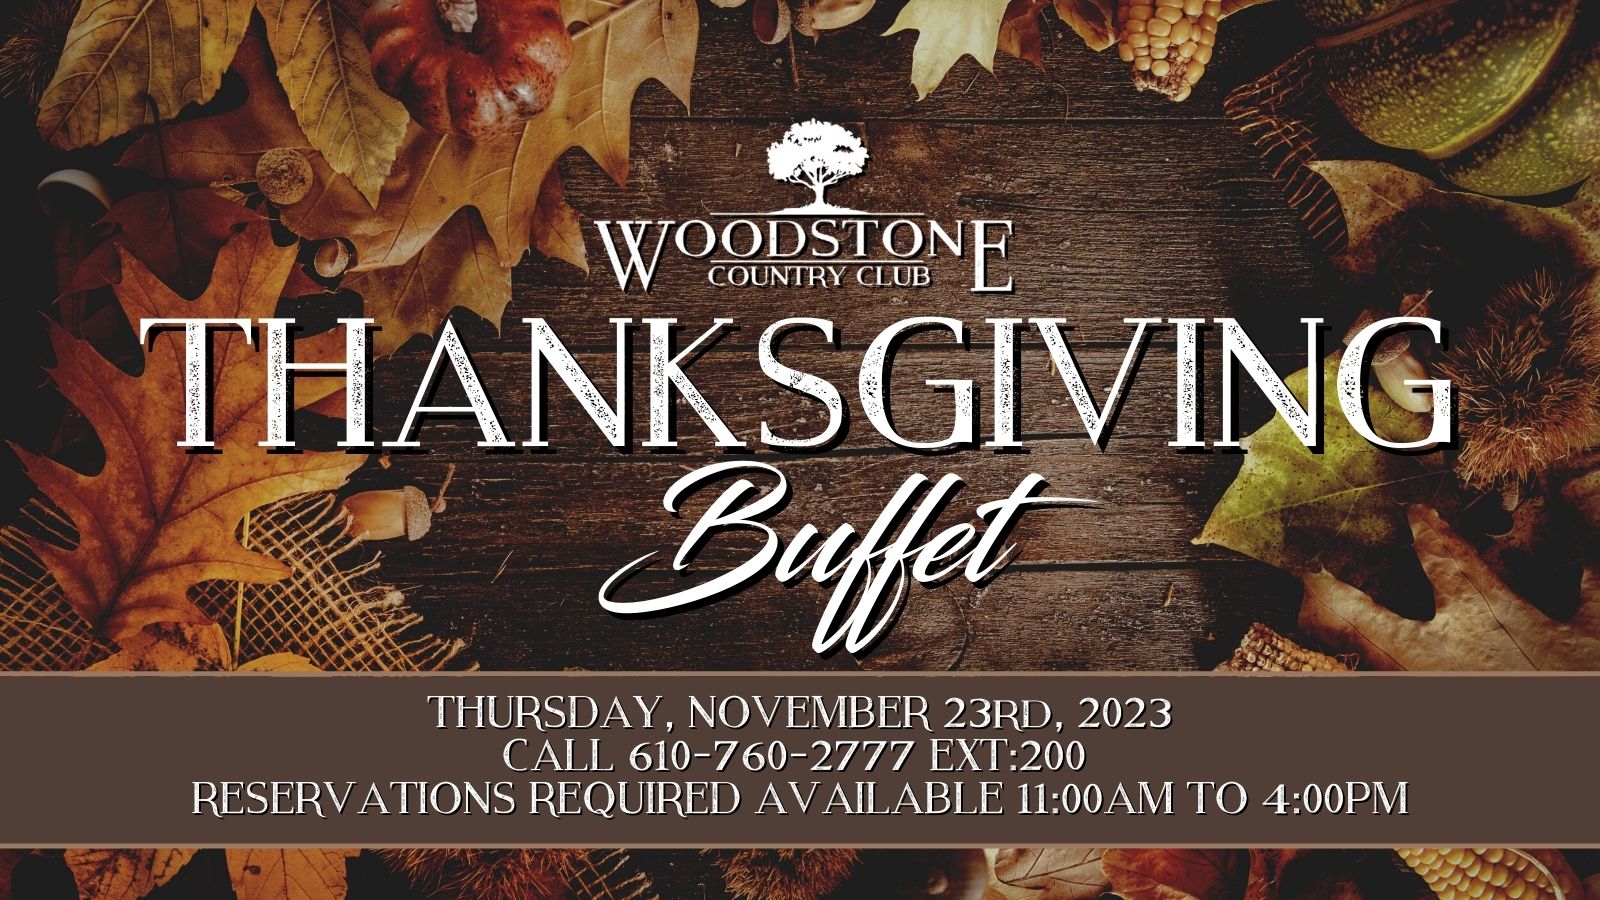 Thanksgiving Day Buffet - Woodstone Country Club and Lodge